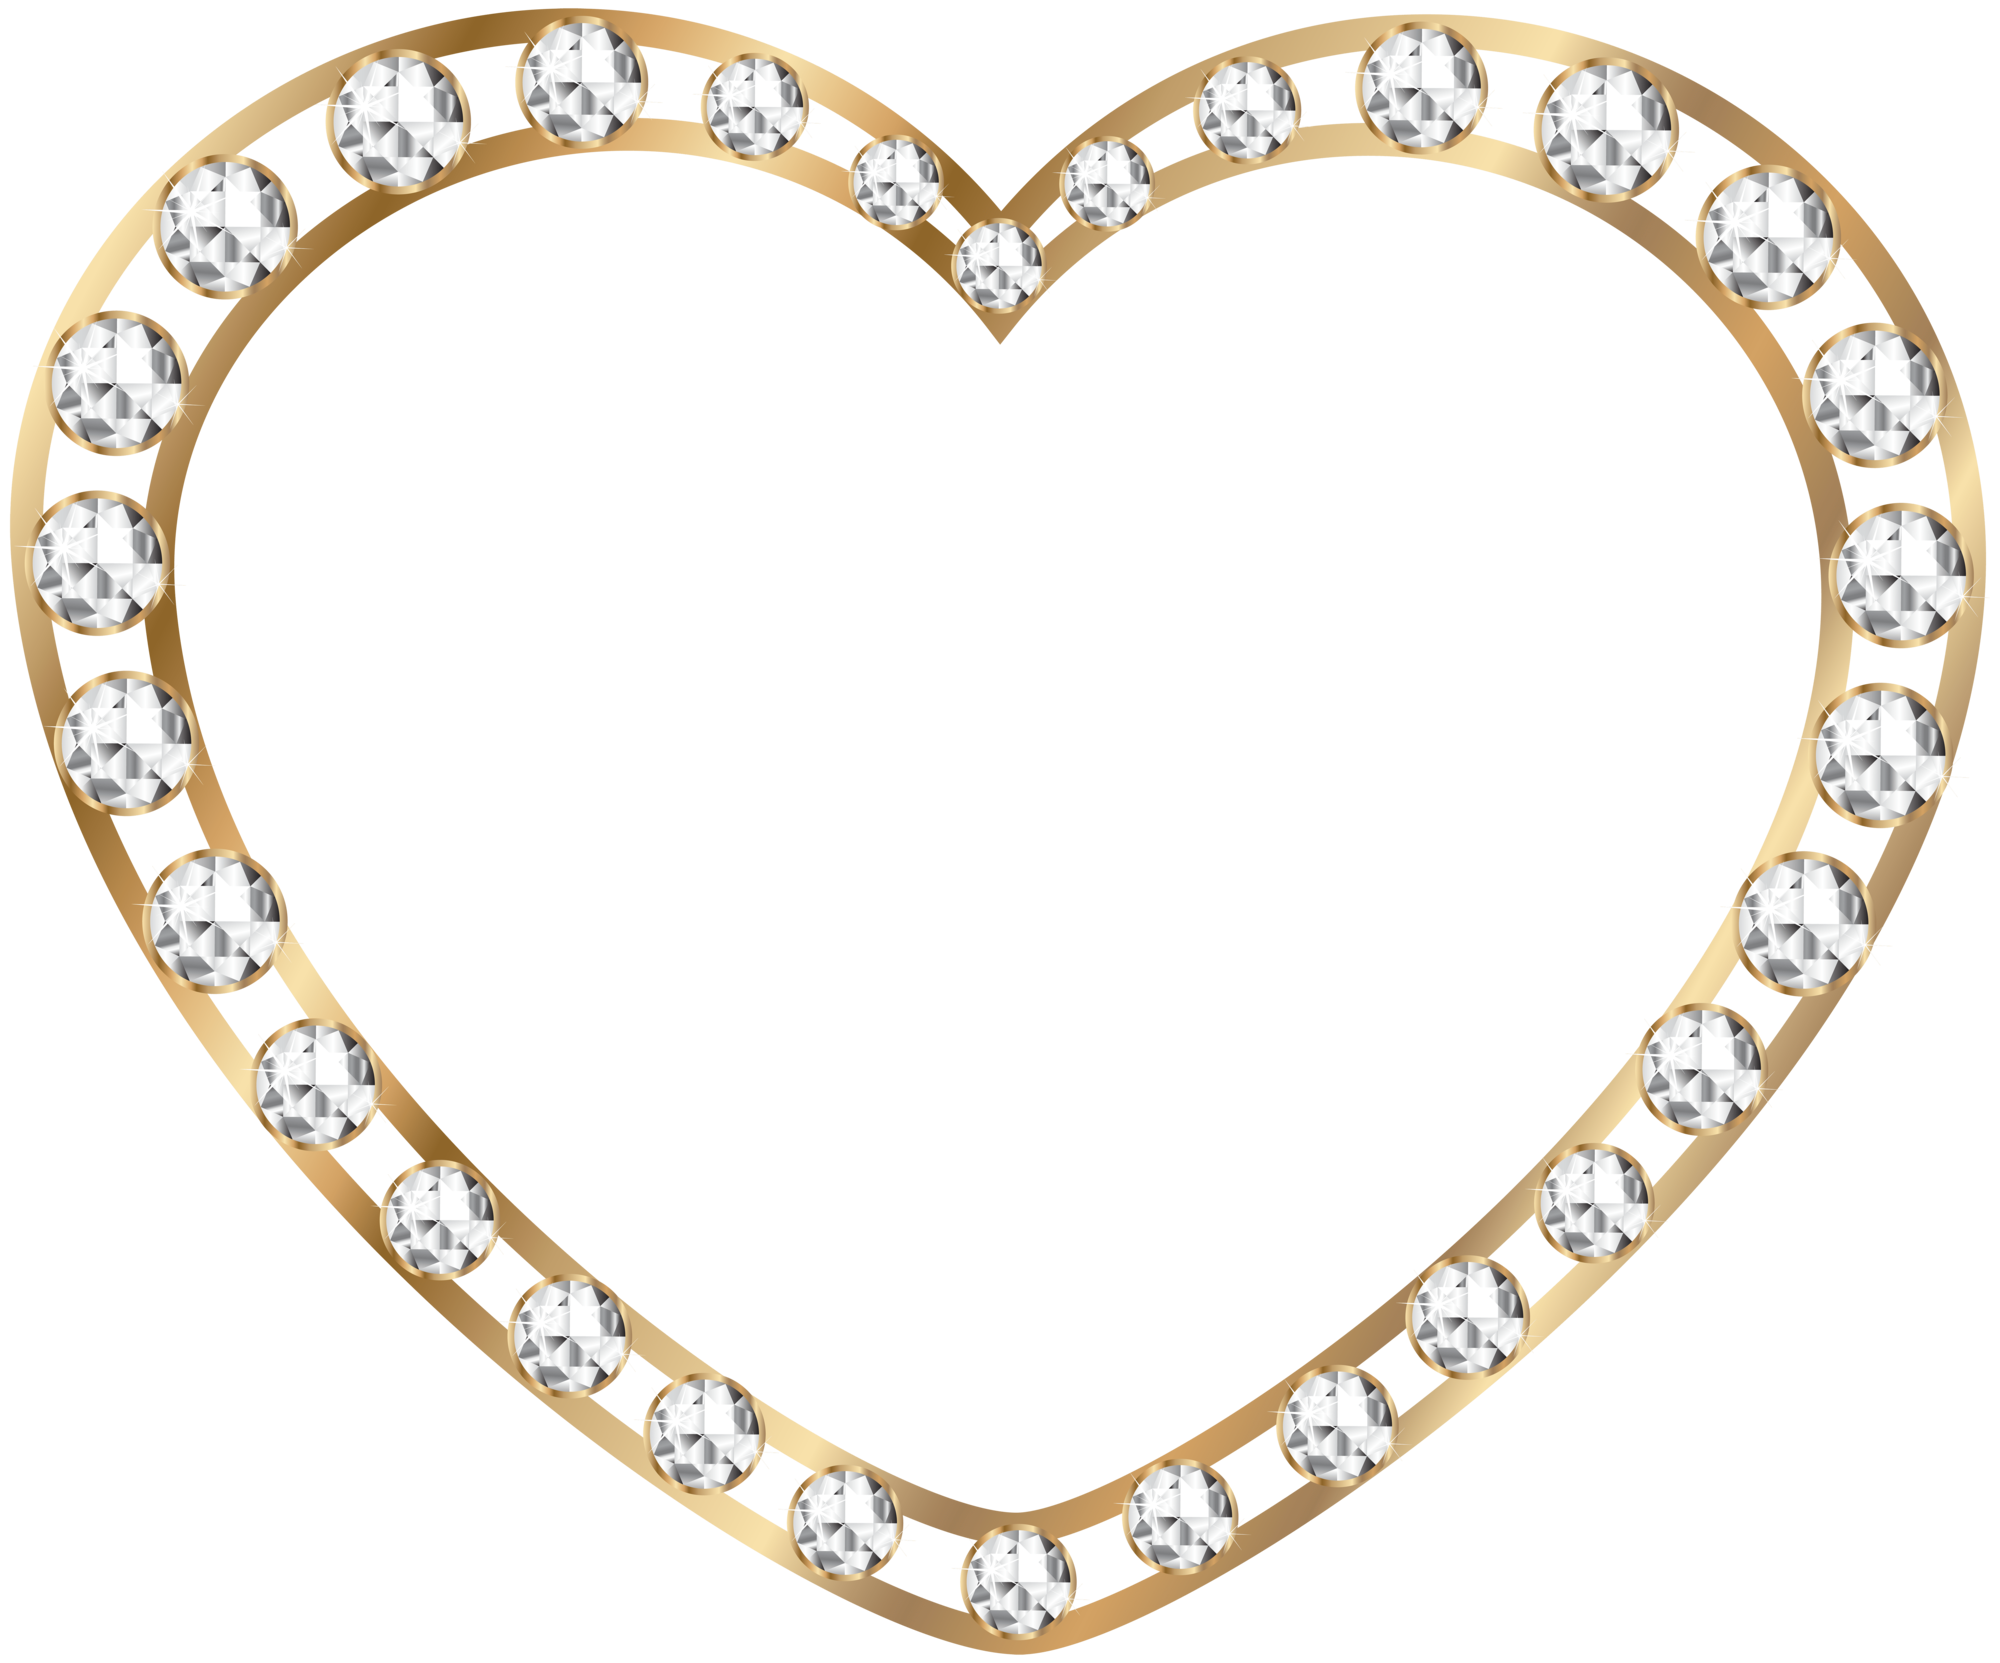 Gold Heart with Diamonds Transparent PNG Image